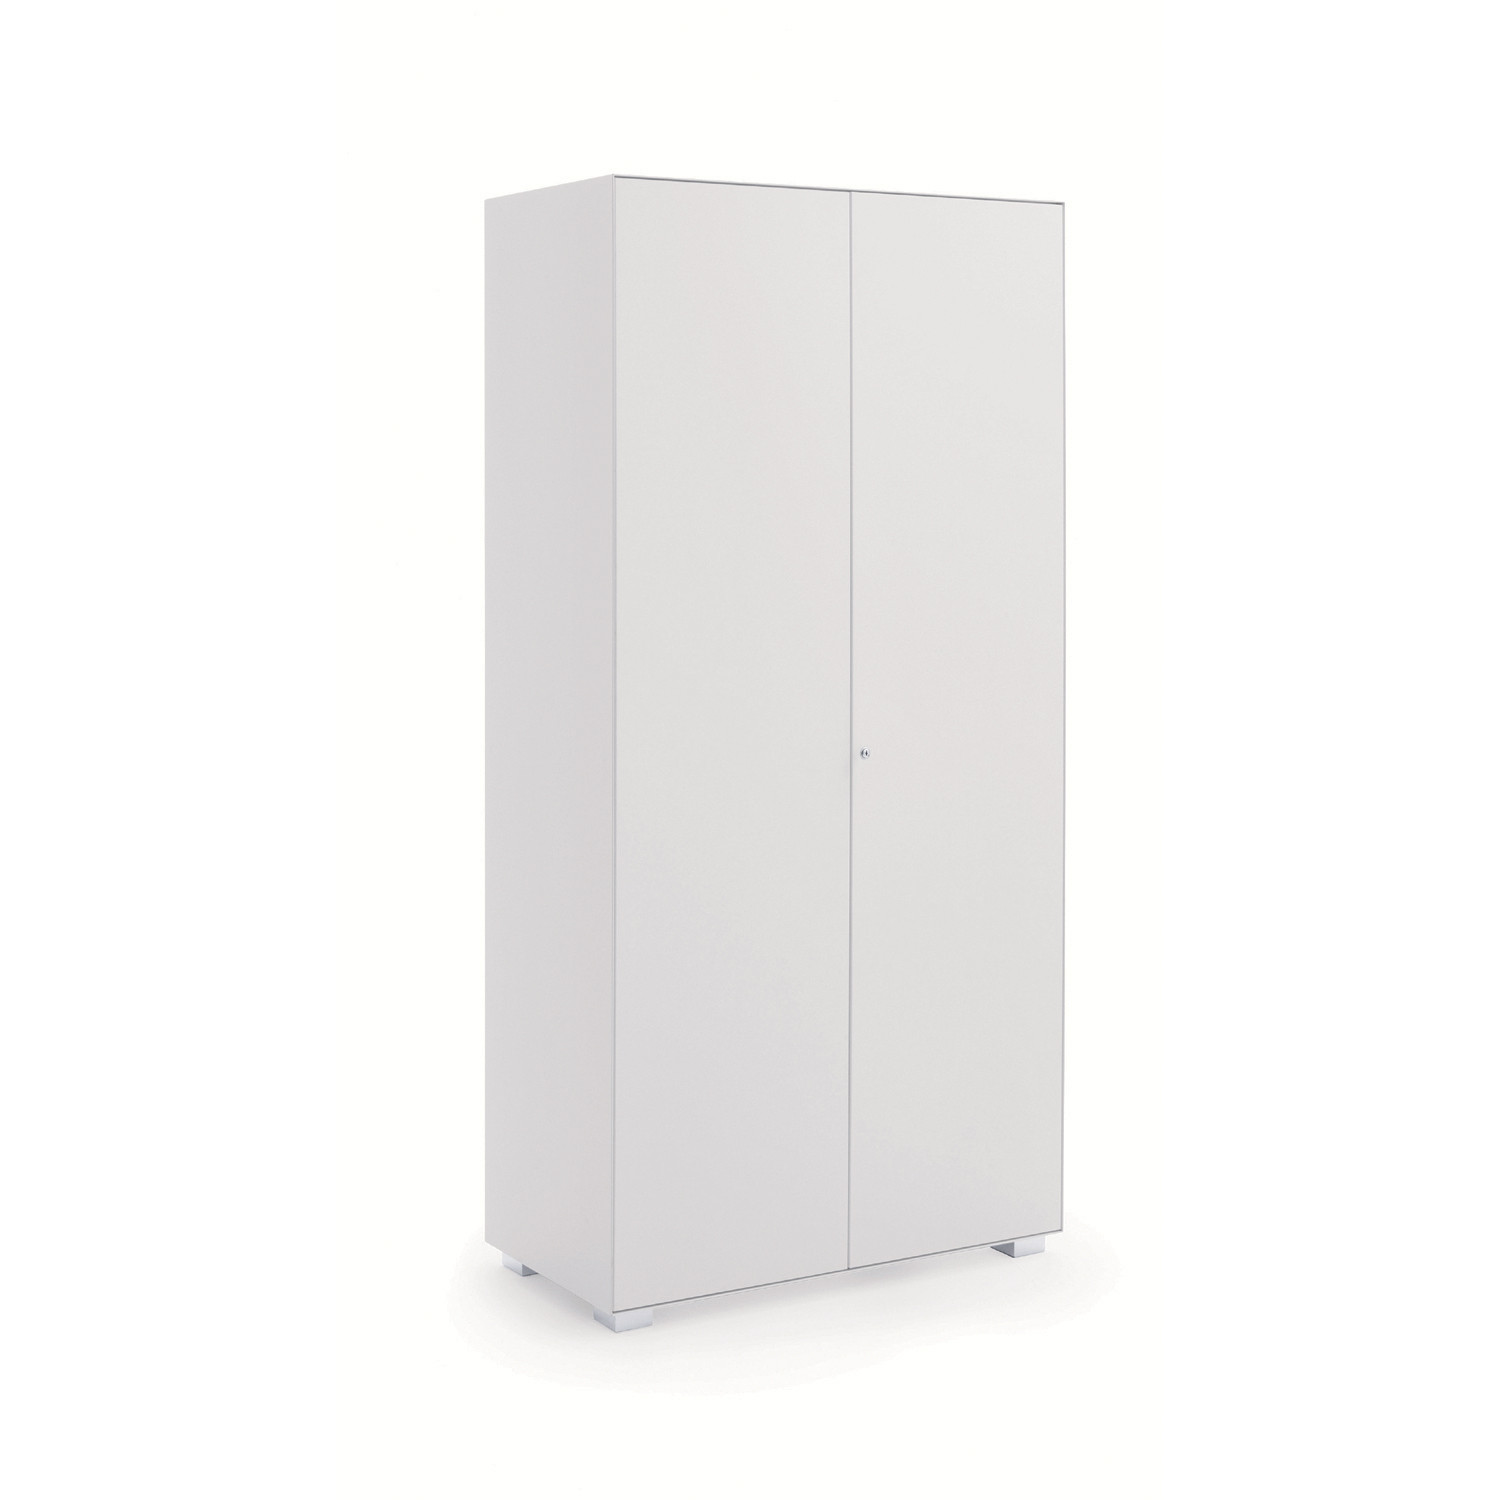 Primo Cupboard is available in different heights